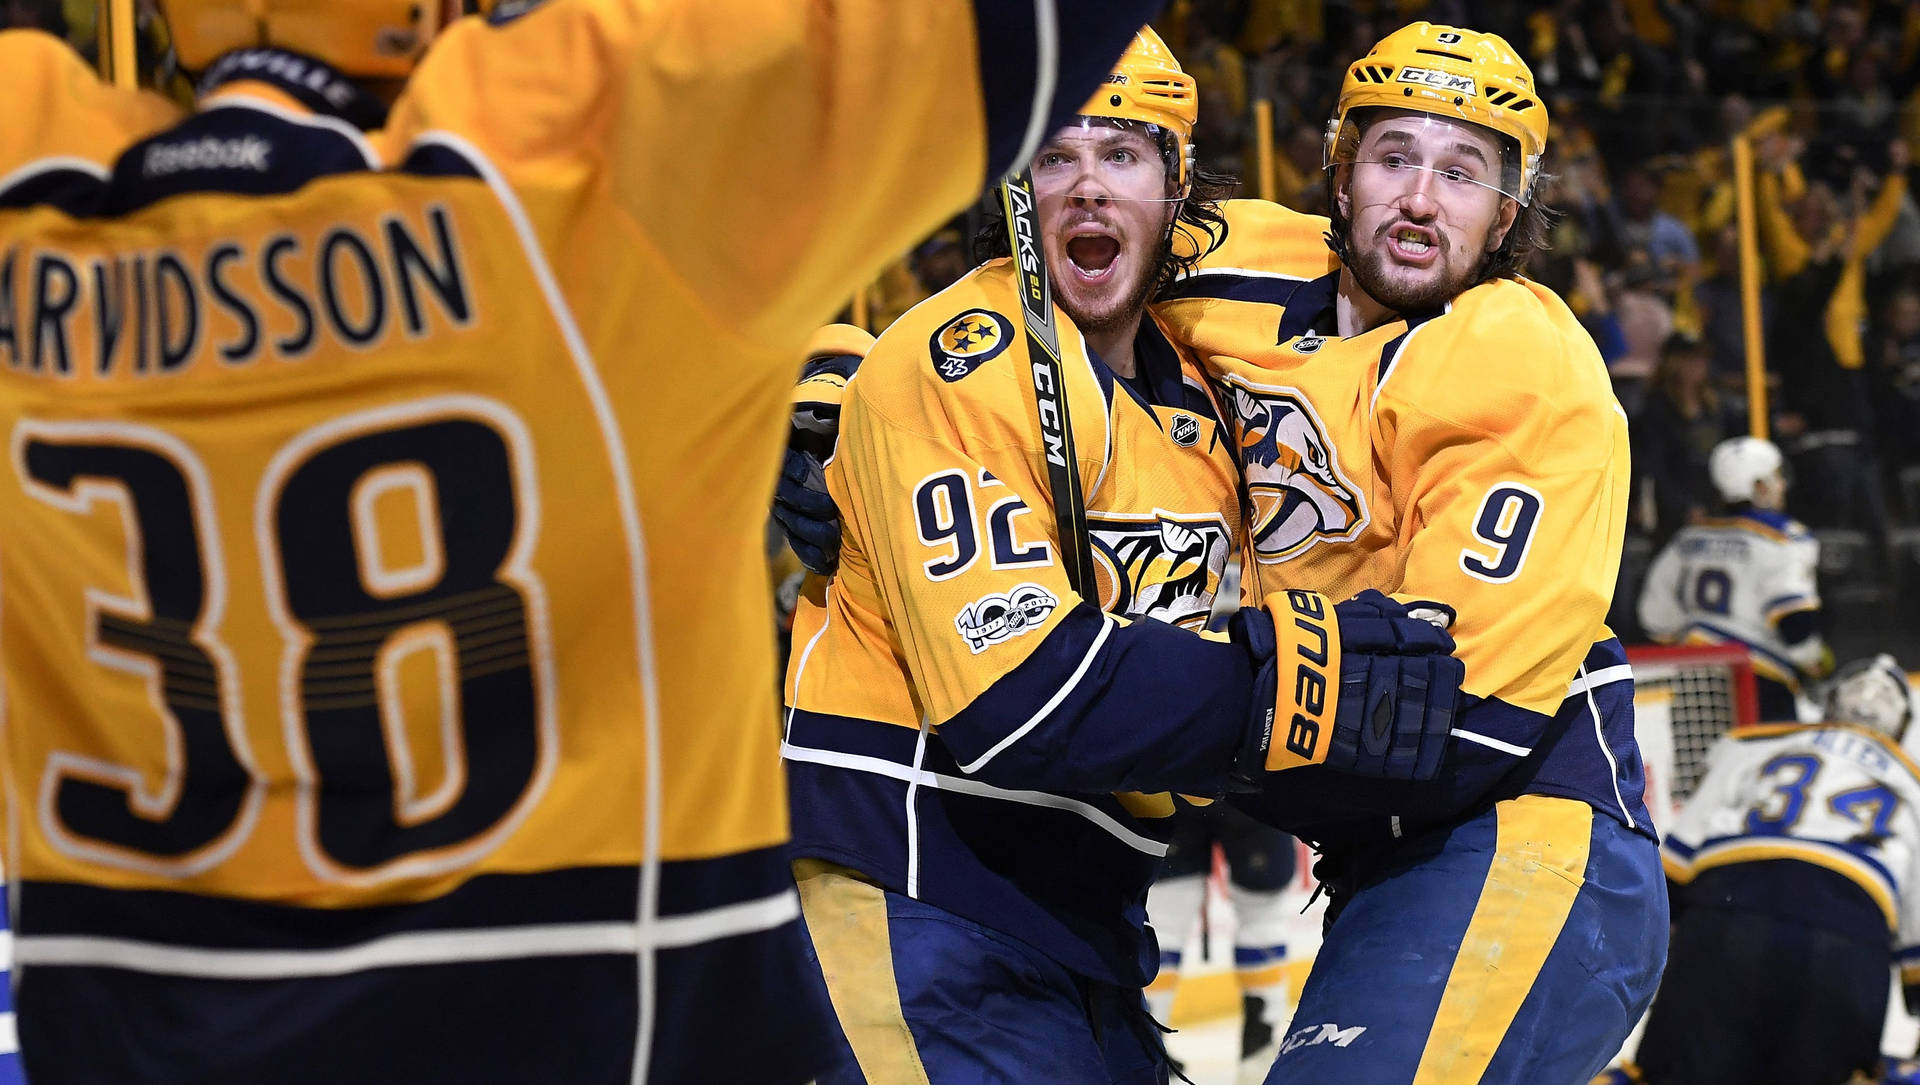 Ryan Johansen In Mid-celebration After A Prominent Win Background